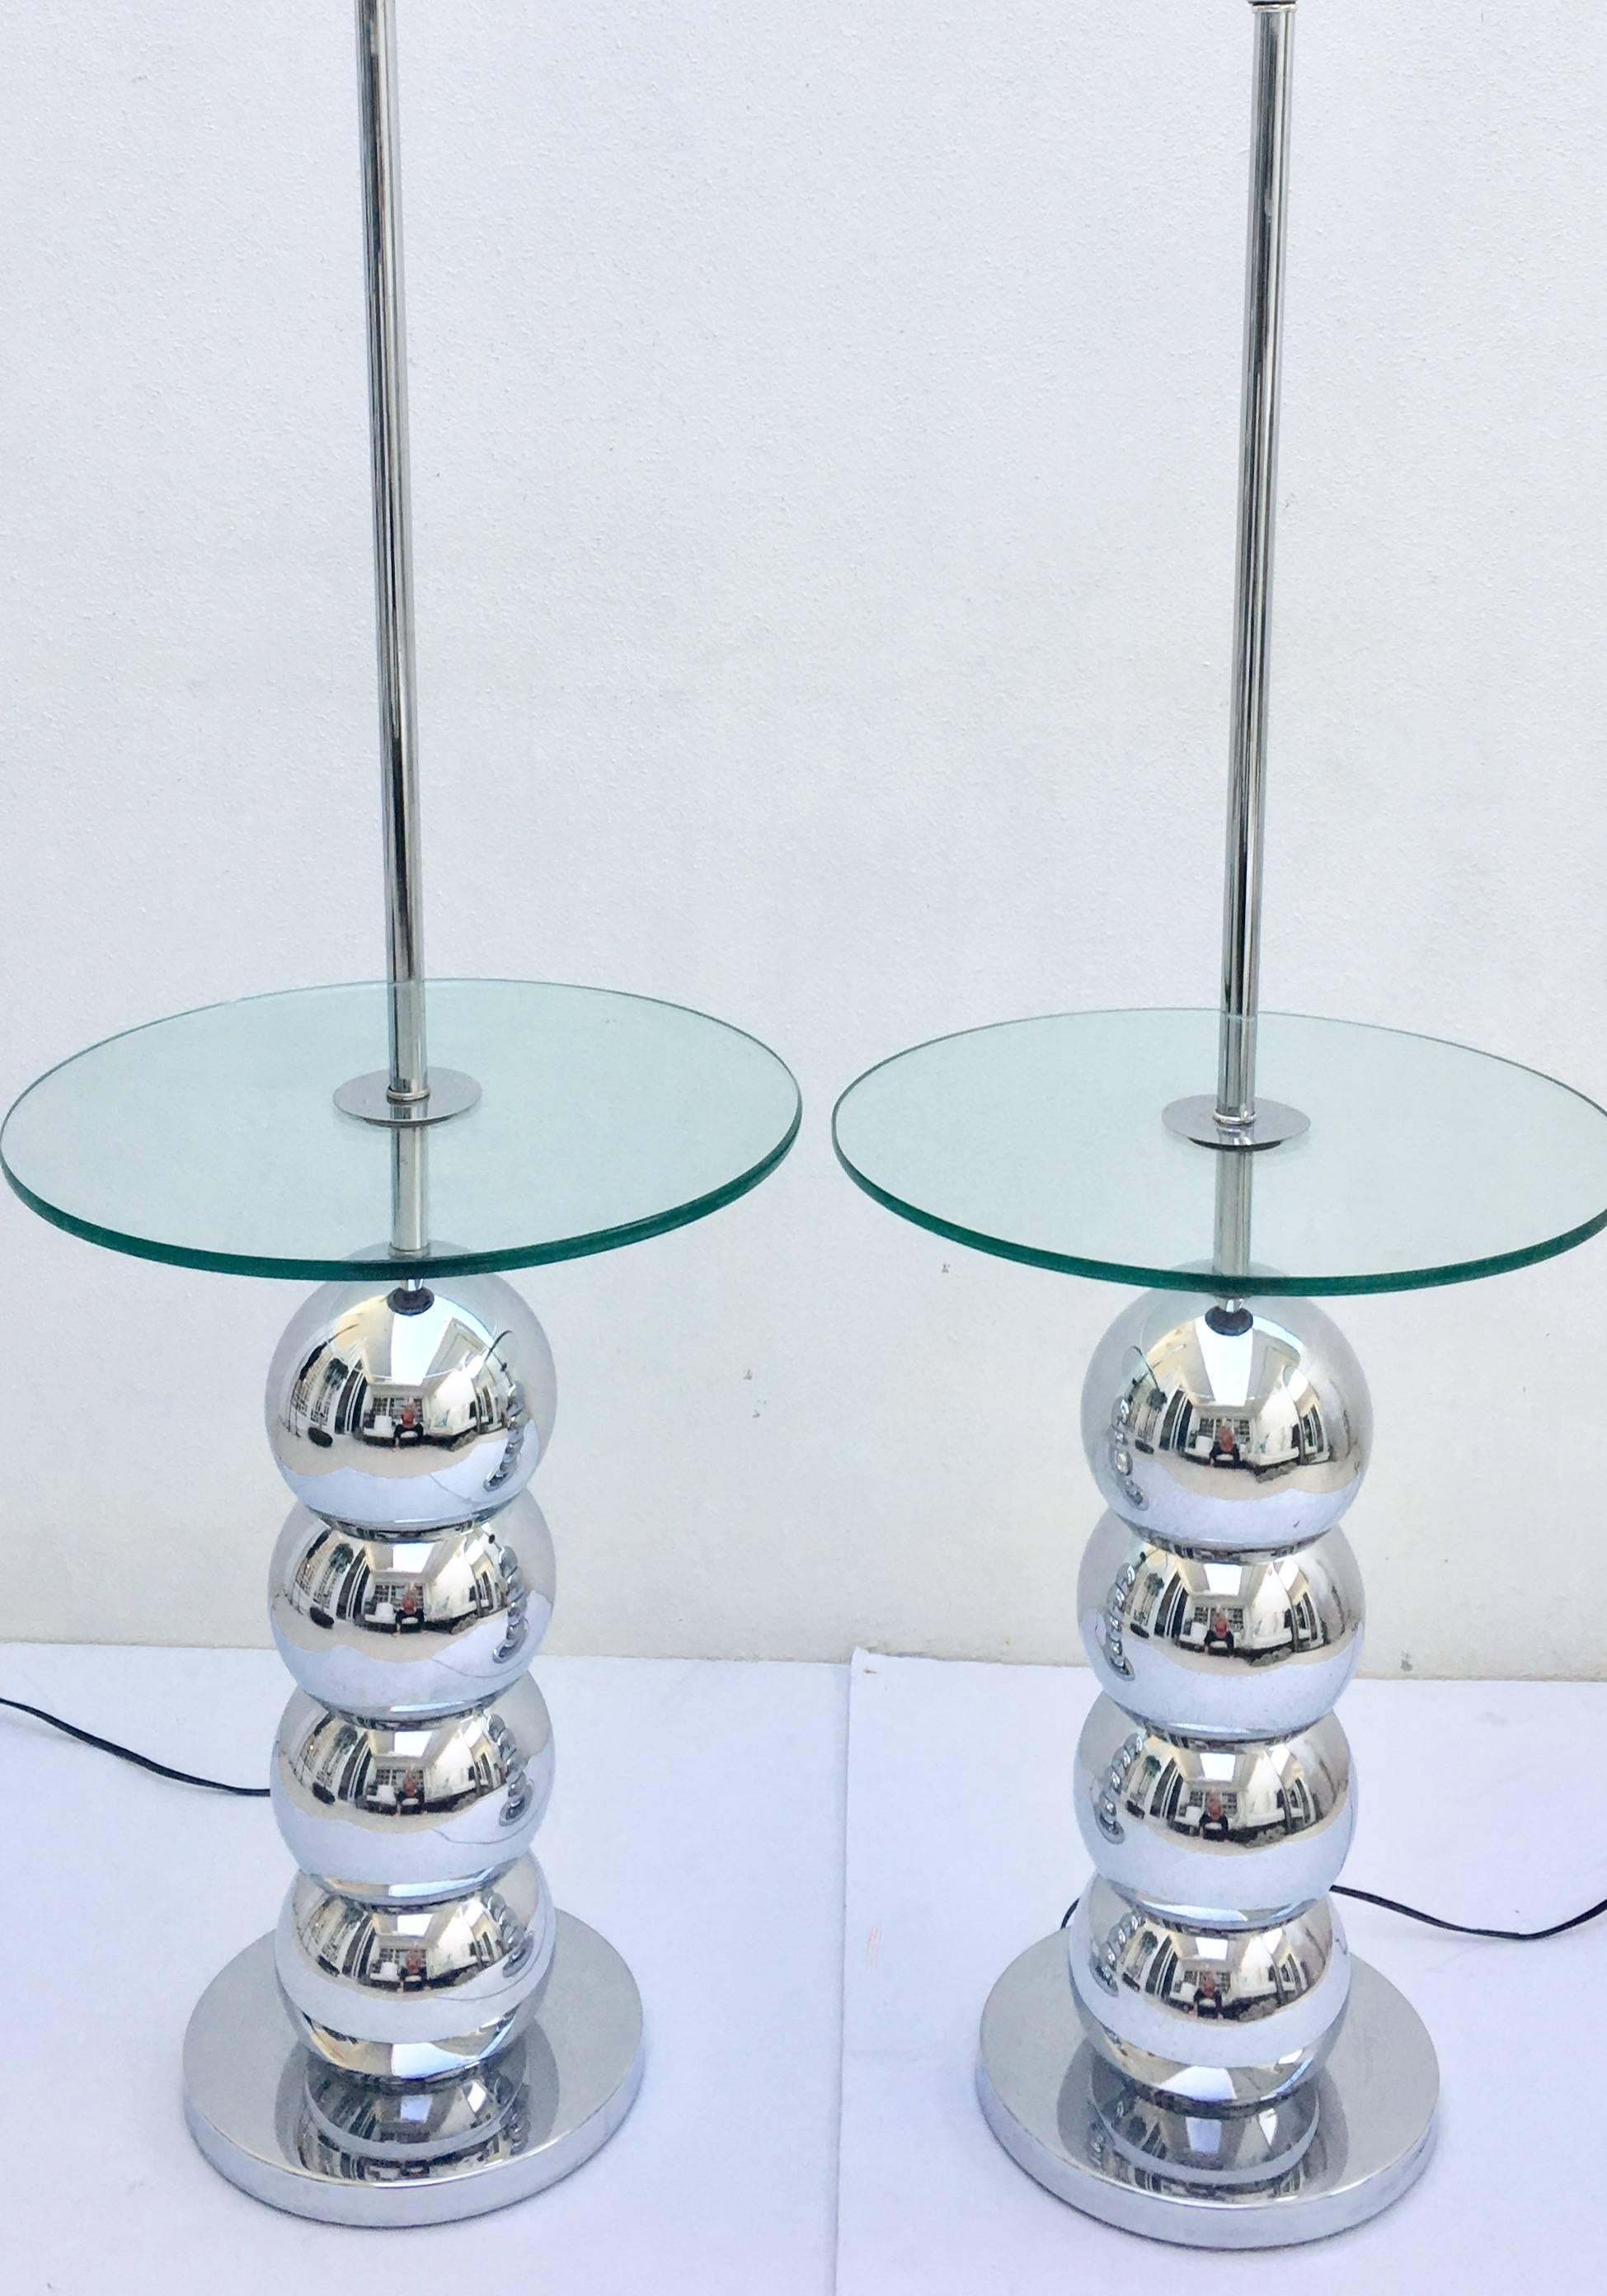 American Pair of Mid-Century Modern Laurel Style Chrome Ball & Glass Table Floor Lamps For Sale